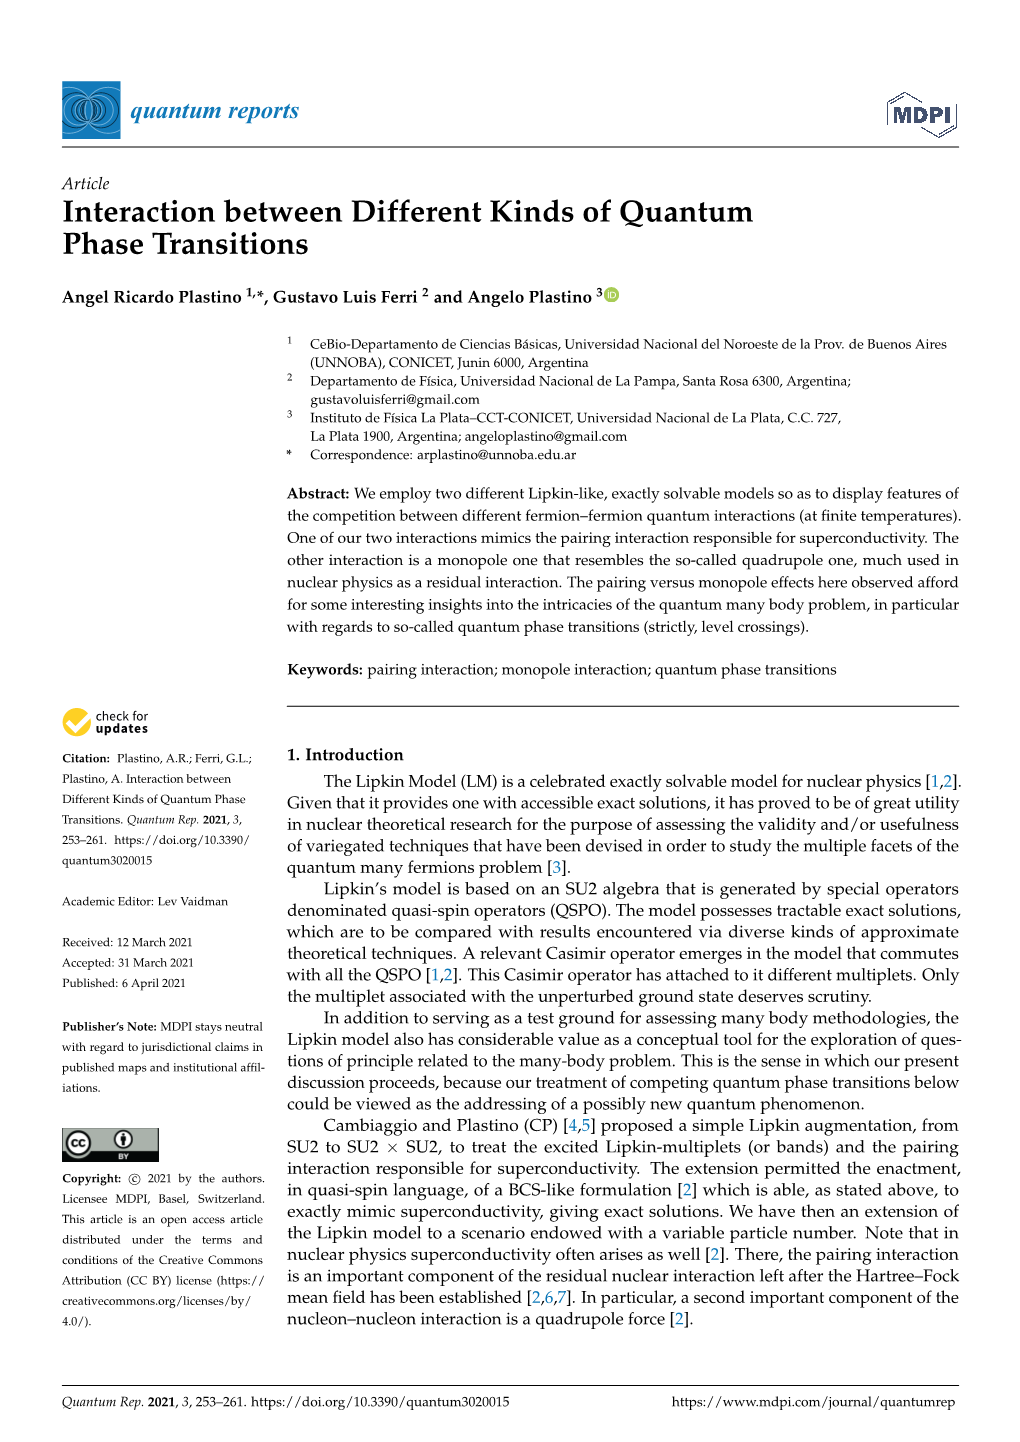 Interaction Between Different Kinds of Quantum Phase Transitions